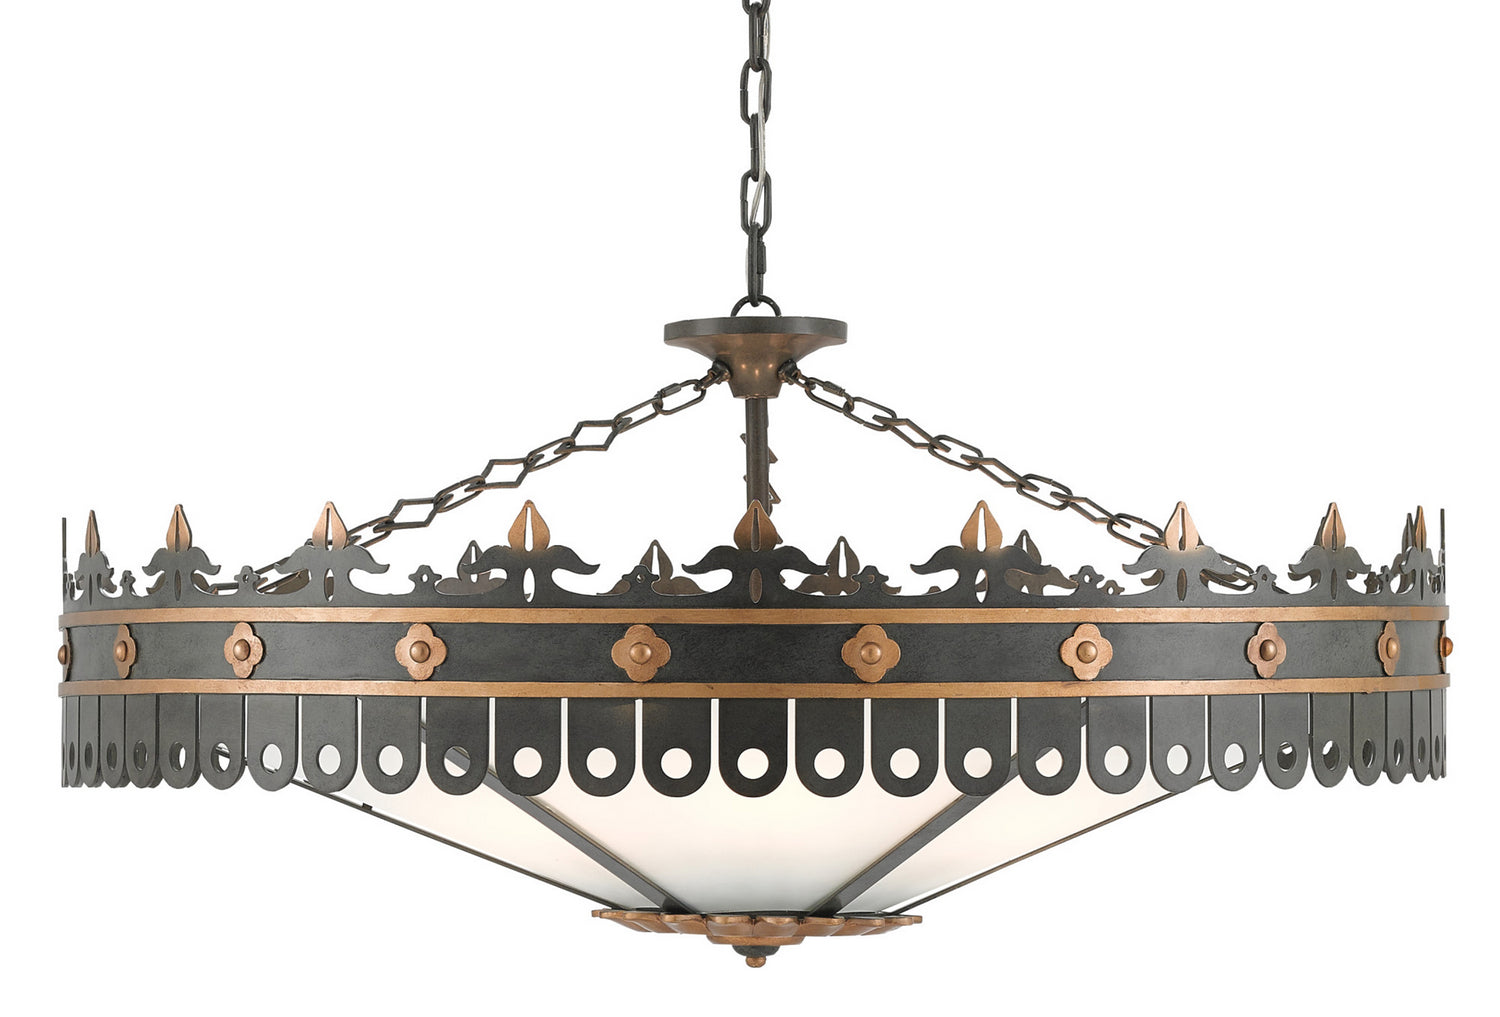 Currey and Company - Six Light Chandelier - Bunny Williams - Antique Gold/Moss Gray- Union Lighting Luminaires Decor